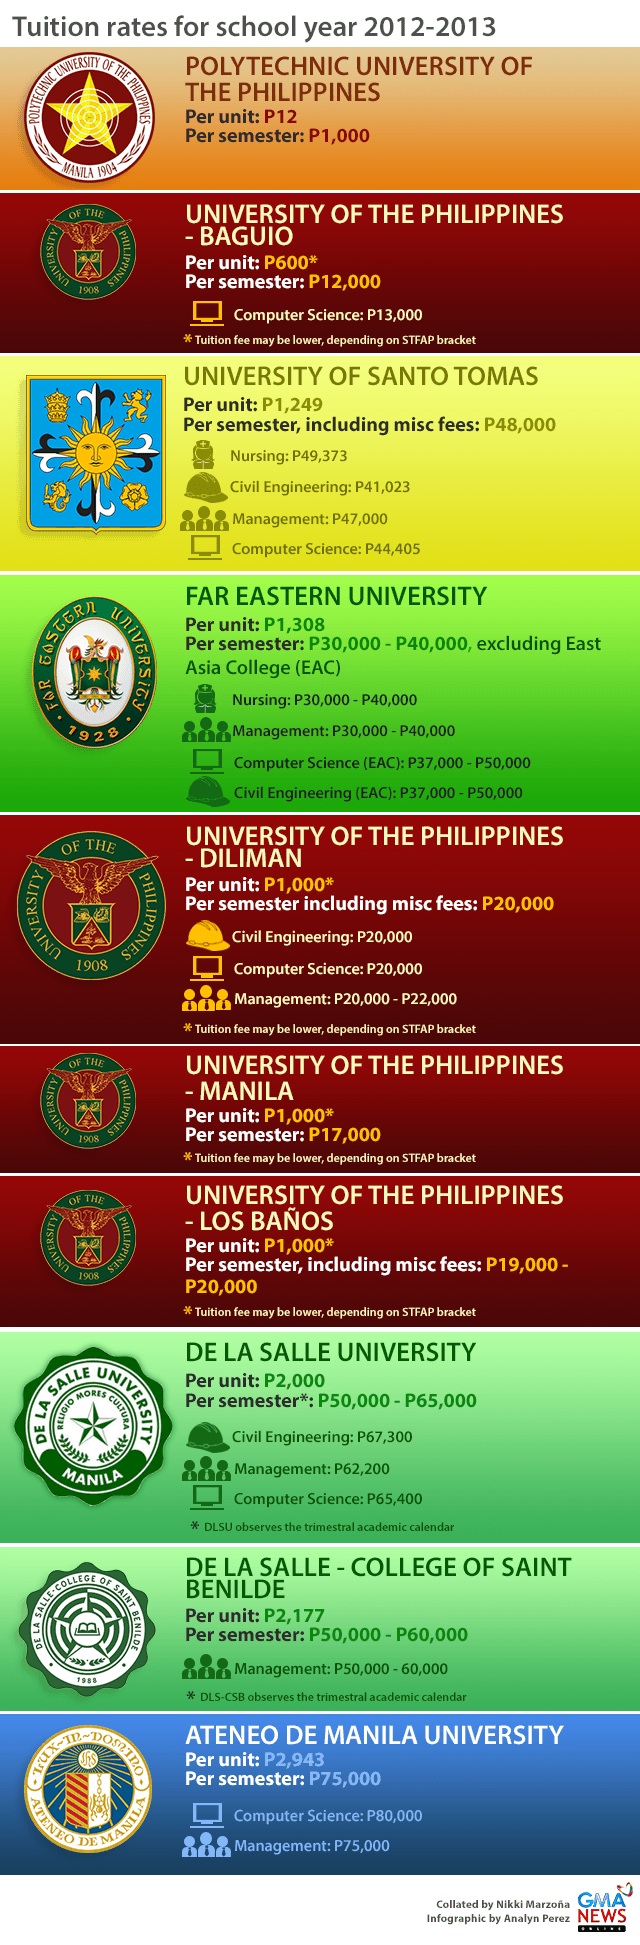 how-to-get-more-than-50-discount-for-your-child-s-college-tuition-fee